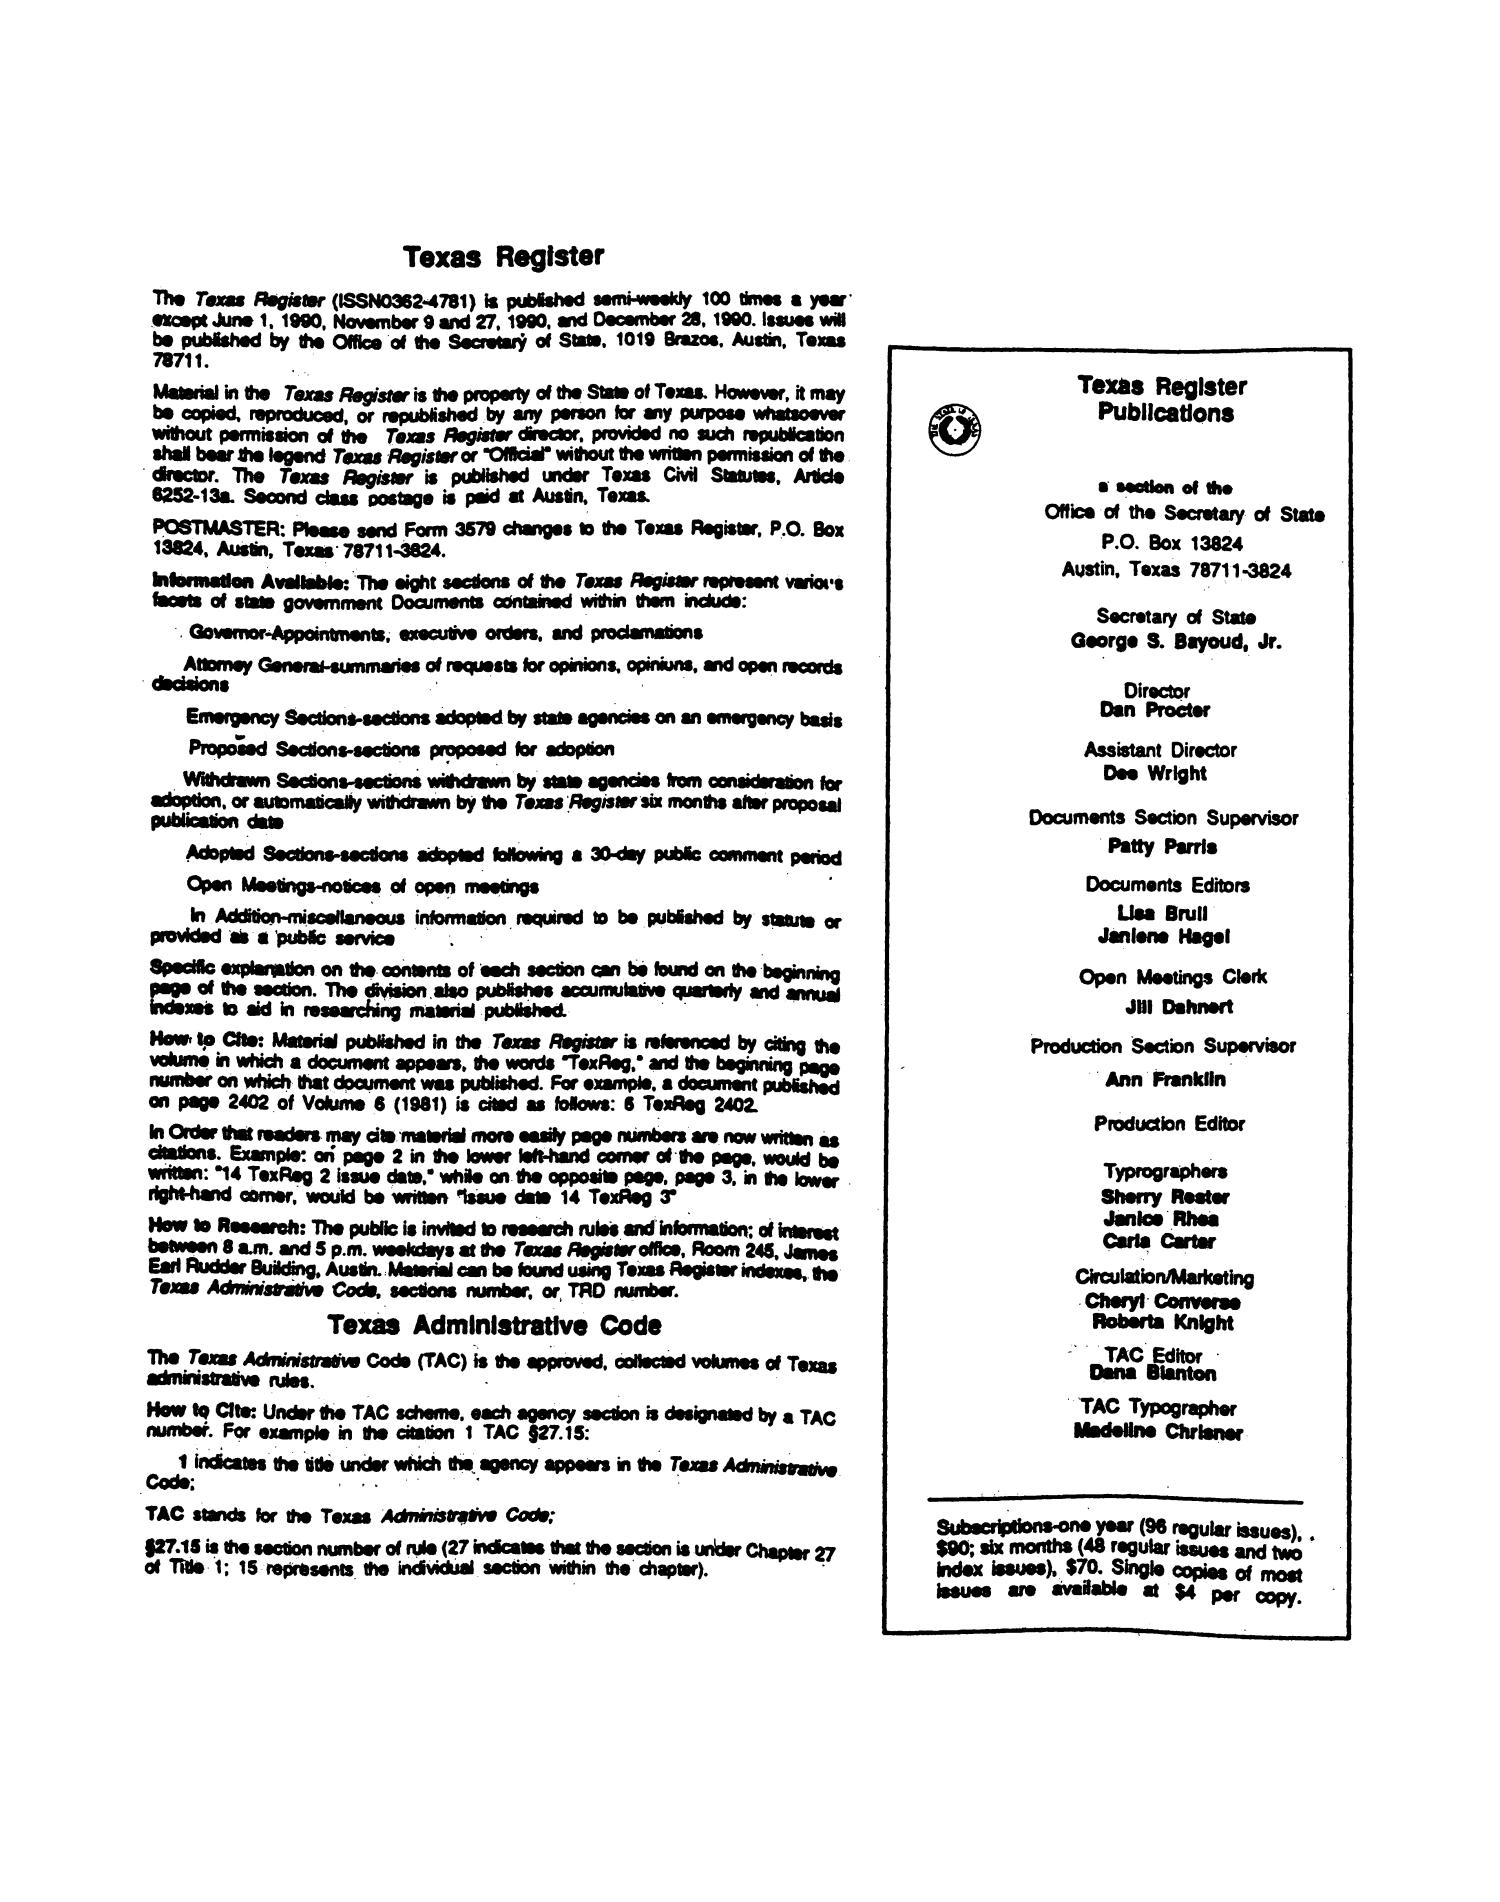 Texas Register Volume 16, Number 2, Pages 63-143, January 8, 1991
                                                
                                                    None
                                                